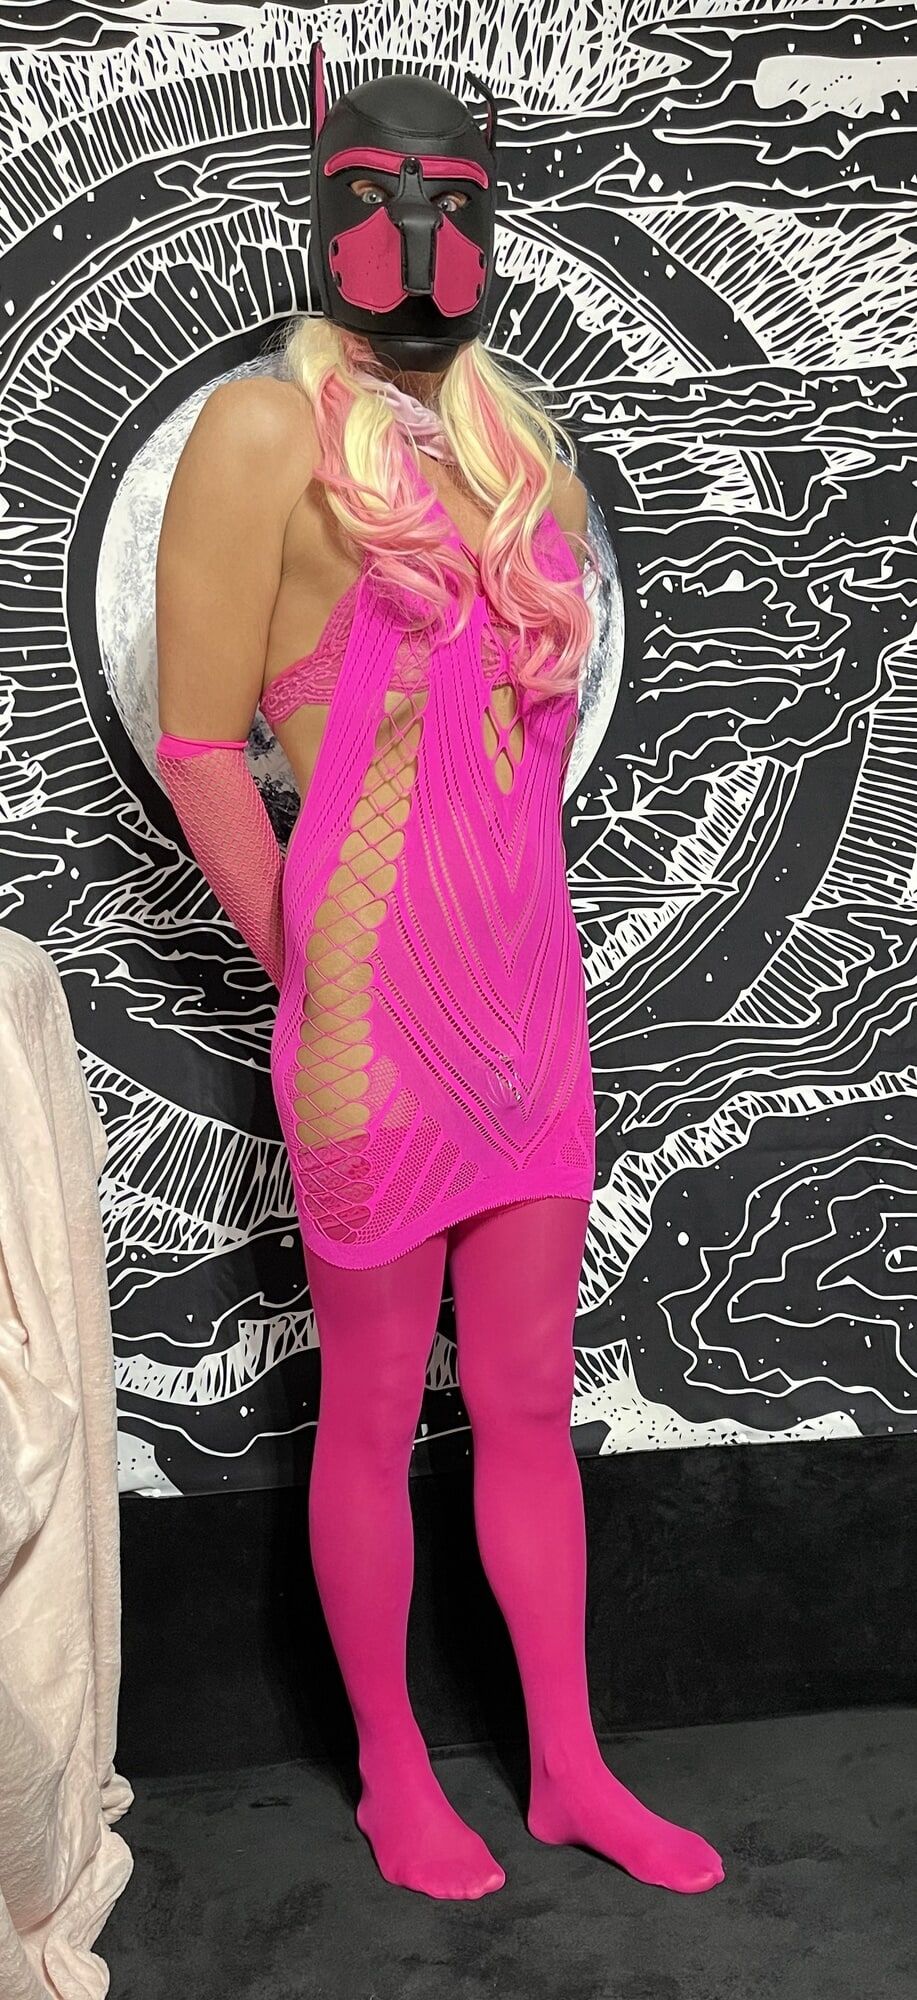 Sissy in Pink High Heels and Pink Lingerie. #18